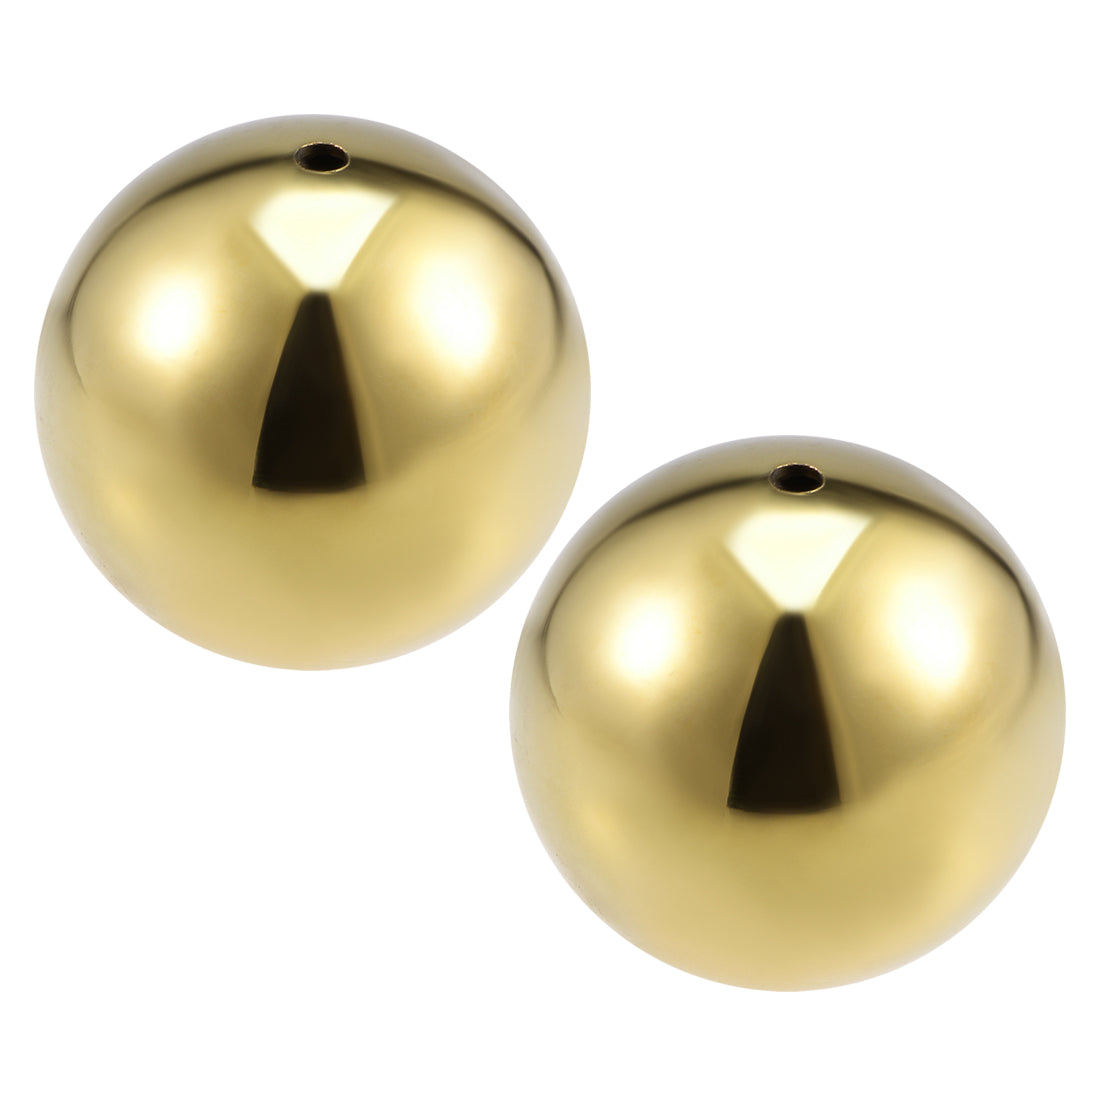 uxcell Uxcell 50mm Dia 201 Stainless Steel Hollow Cap Ball Spheres for Handrail Stair Newel Post Gold Tone 2pcs